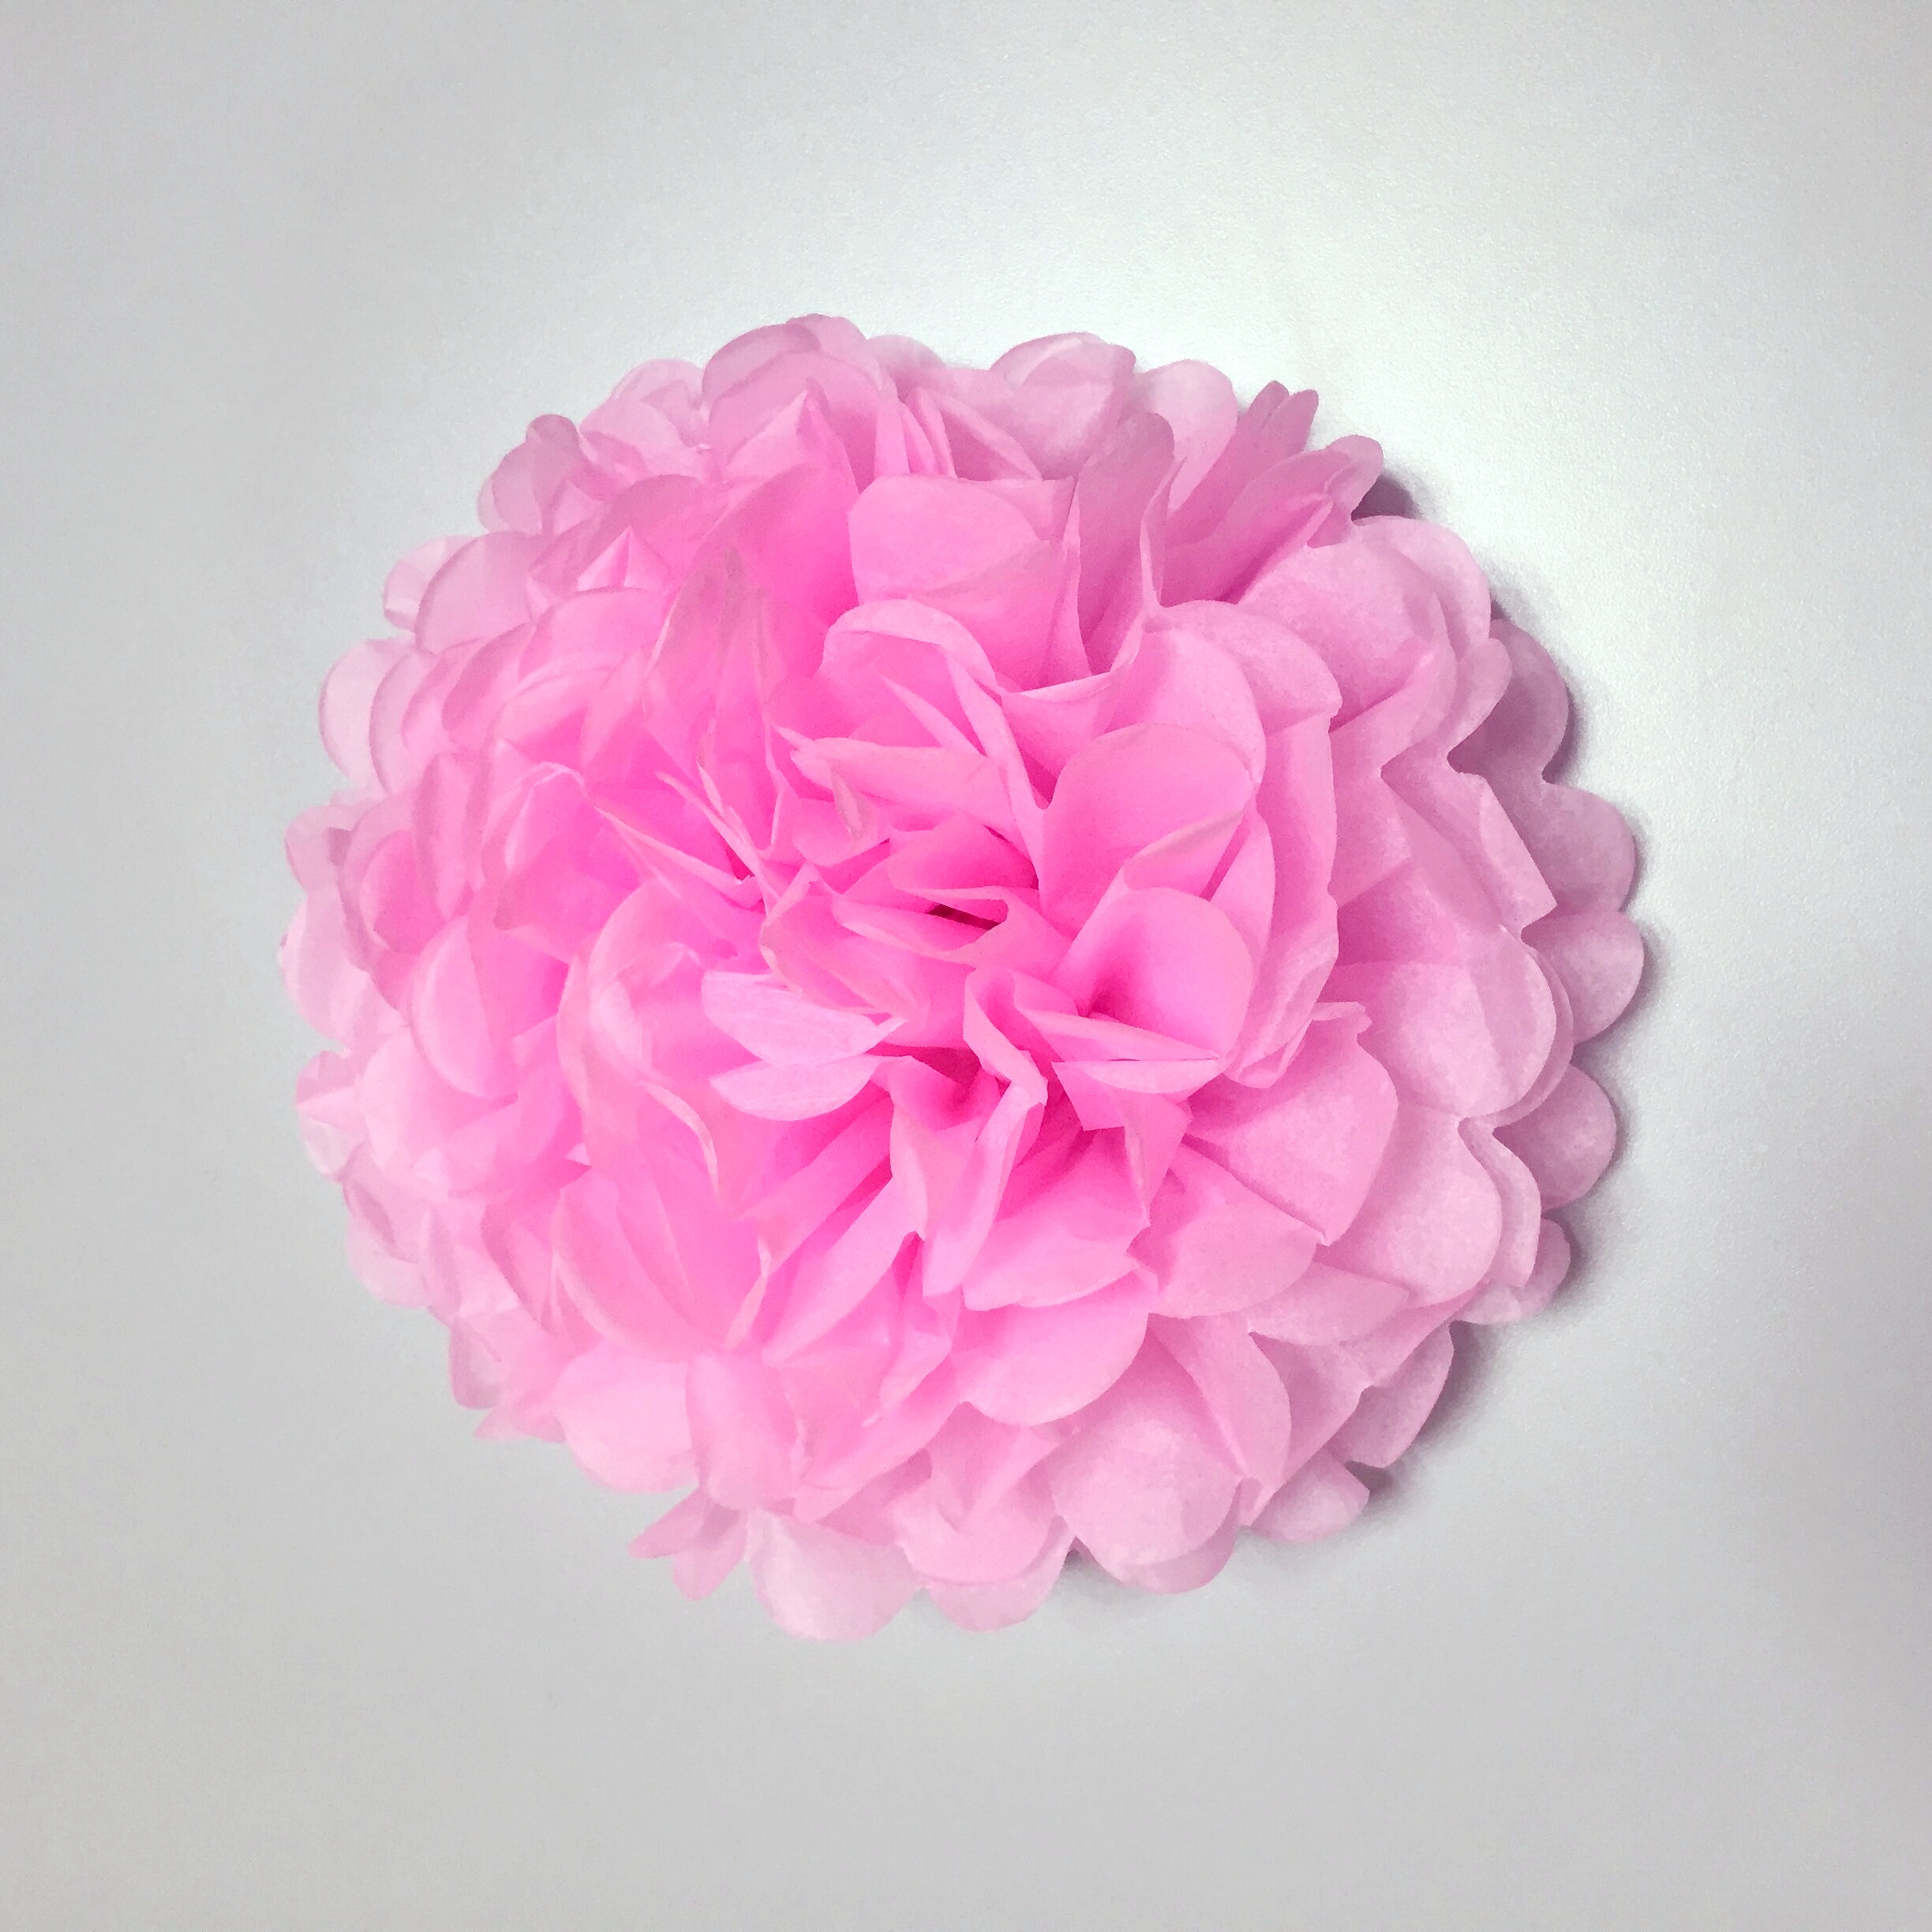 pink pom poms for party decoration